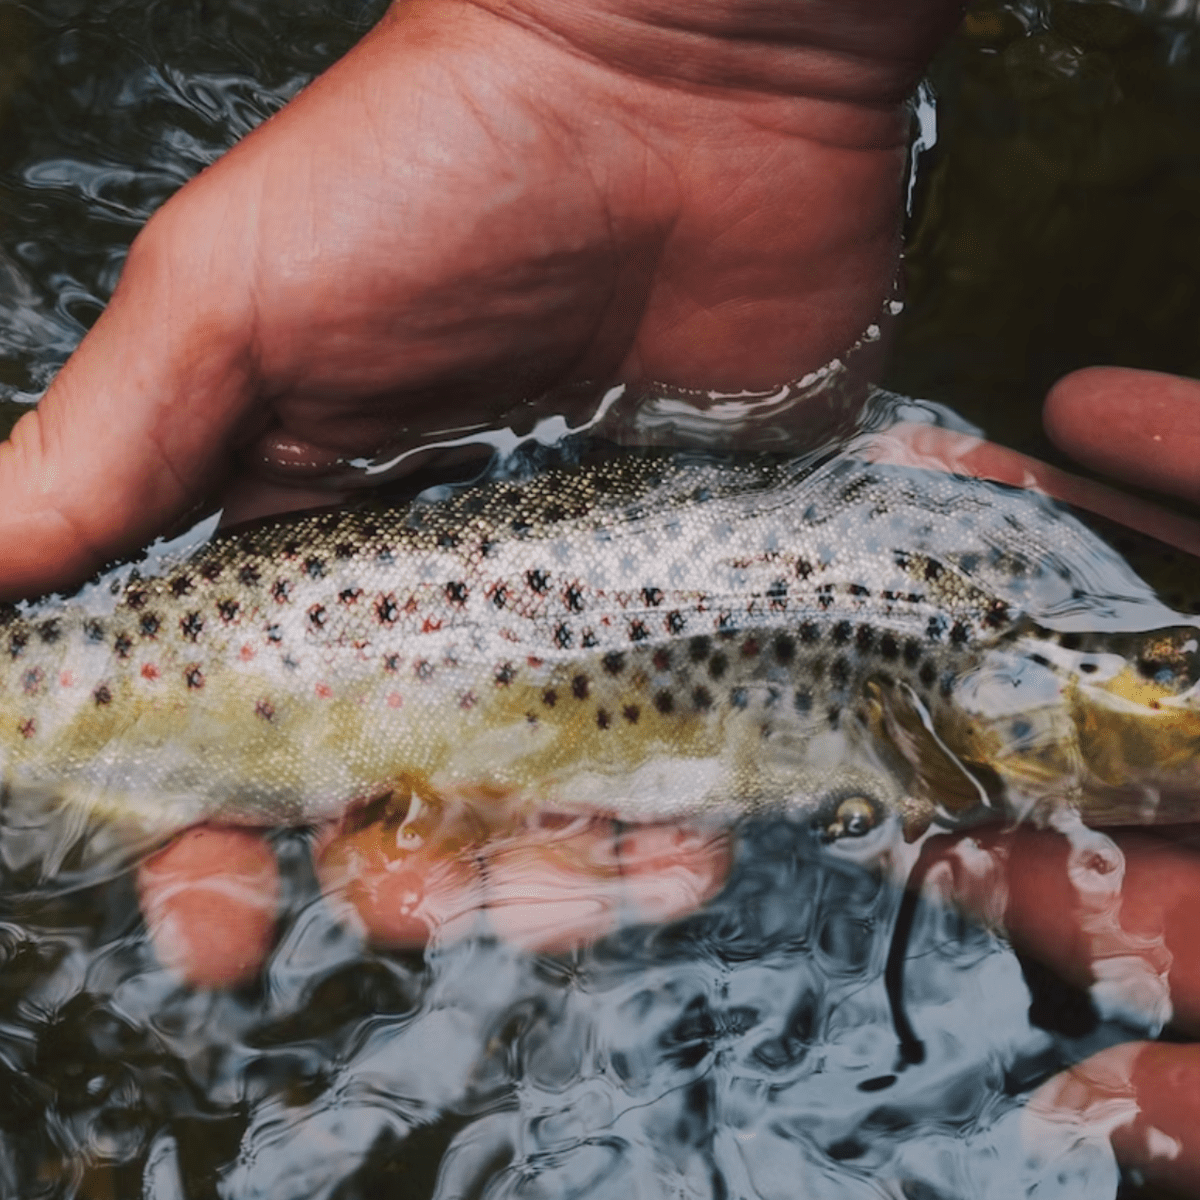 Trout Fly Fishing With a Spinning Rod (& the 1,2,3 Strategy) - SkyAboveUs